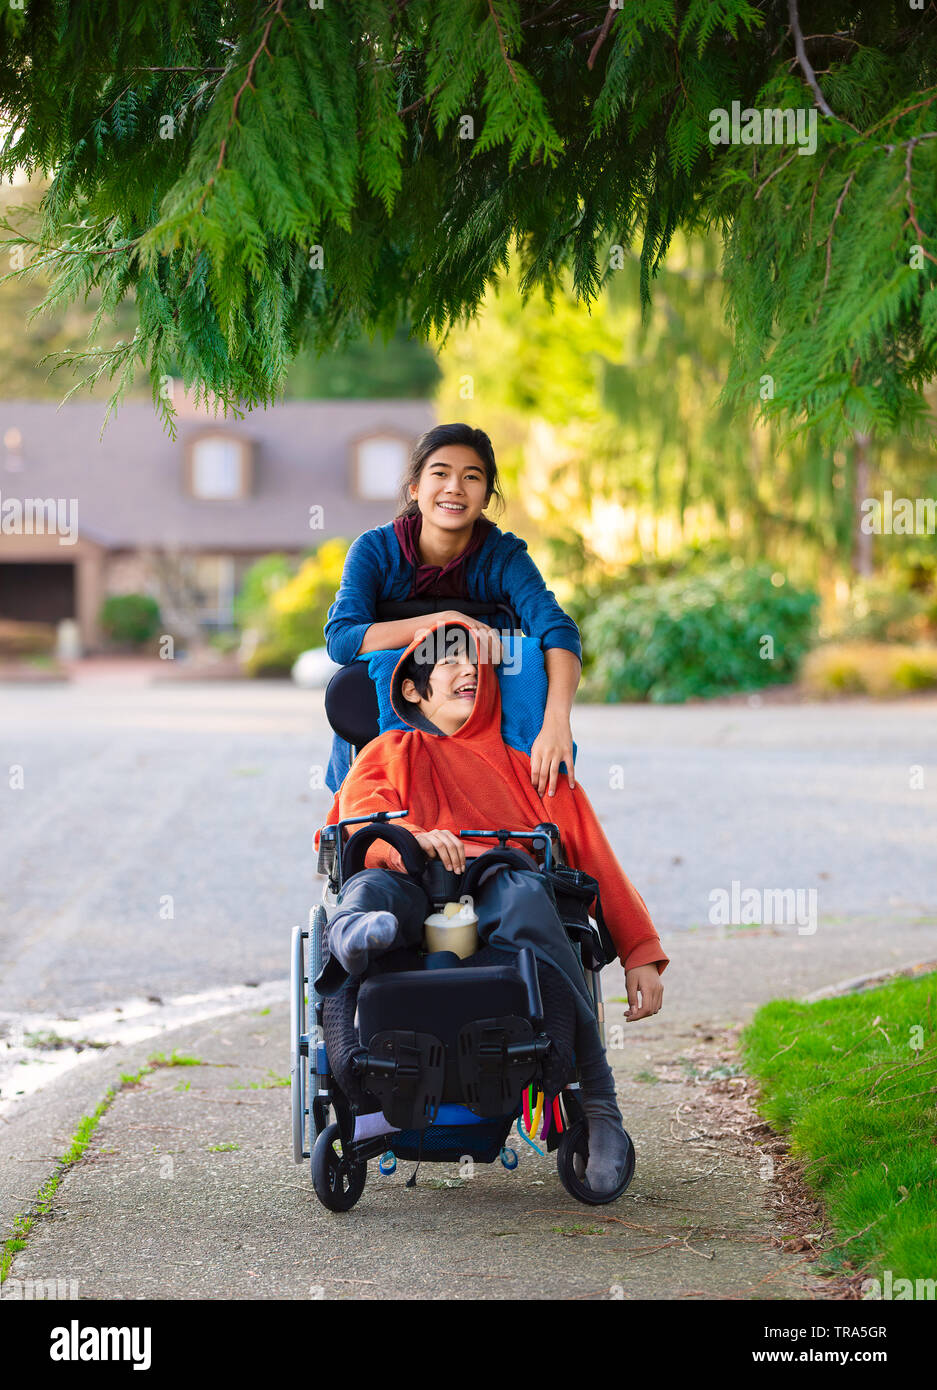 Big sister pushing disabled little brother in wheelchair around neighborhood, laughing and smiling Stock Photo